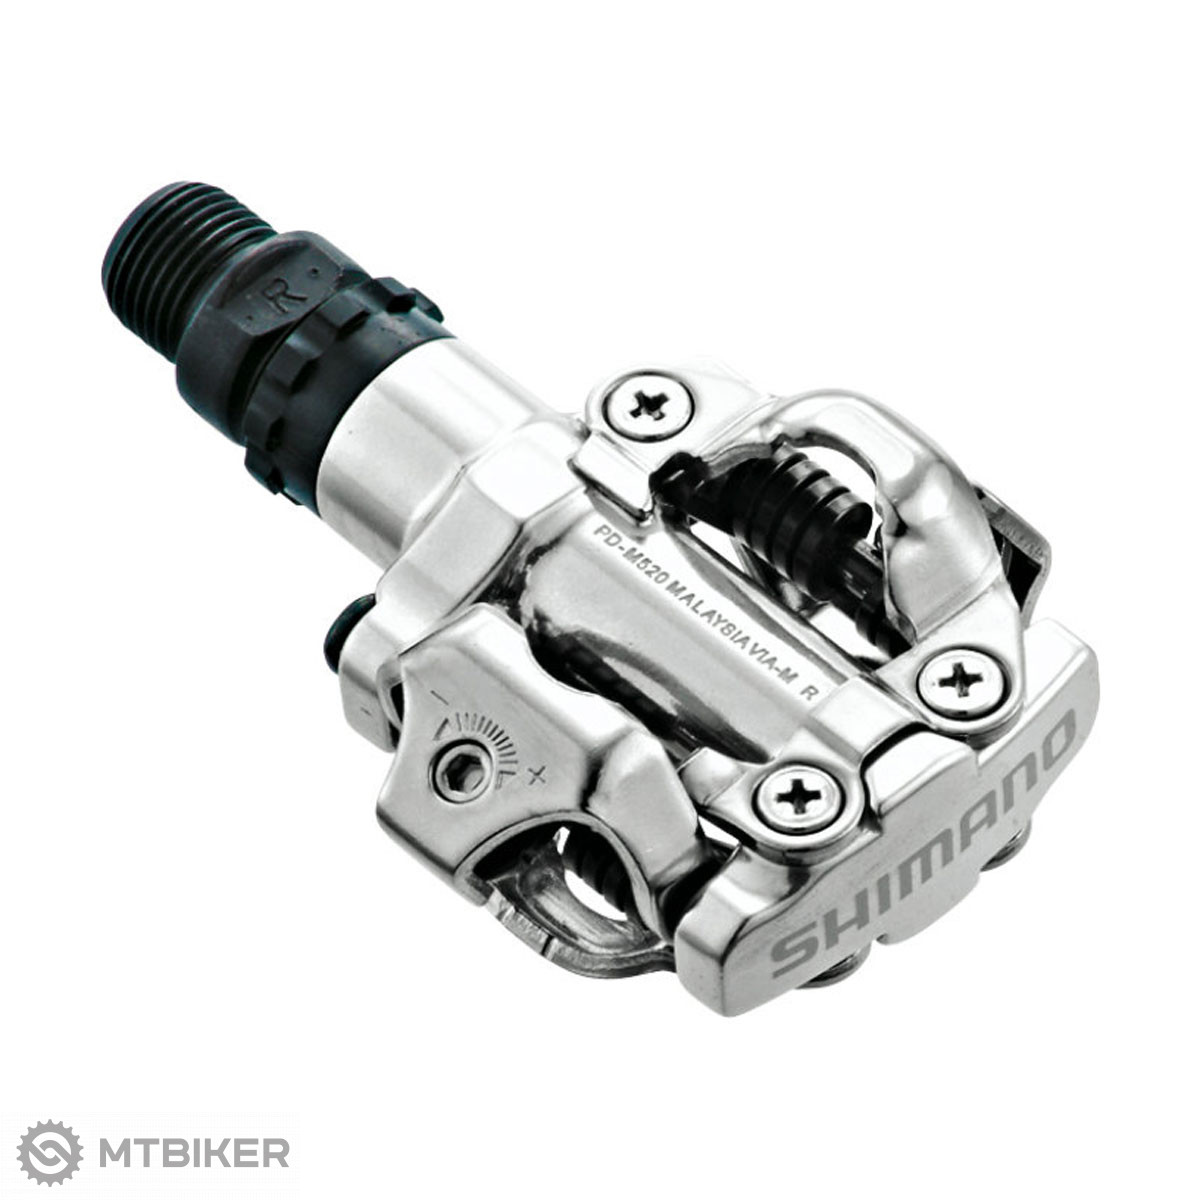 Shimano PD-M520 Klickpedale, silber